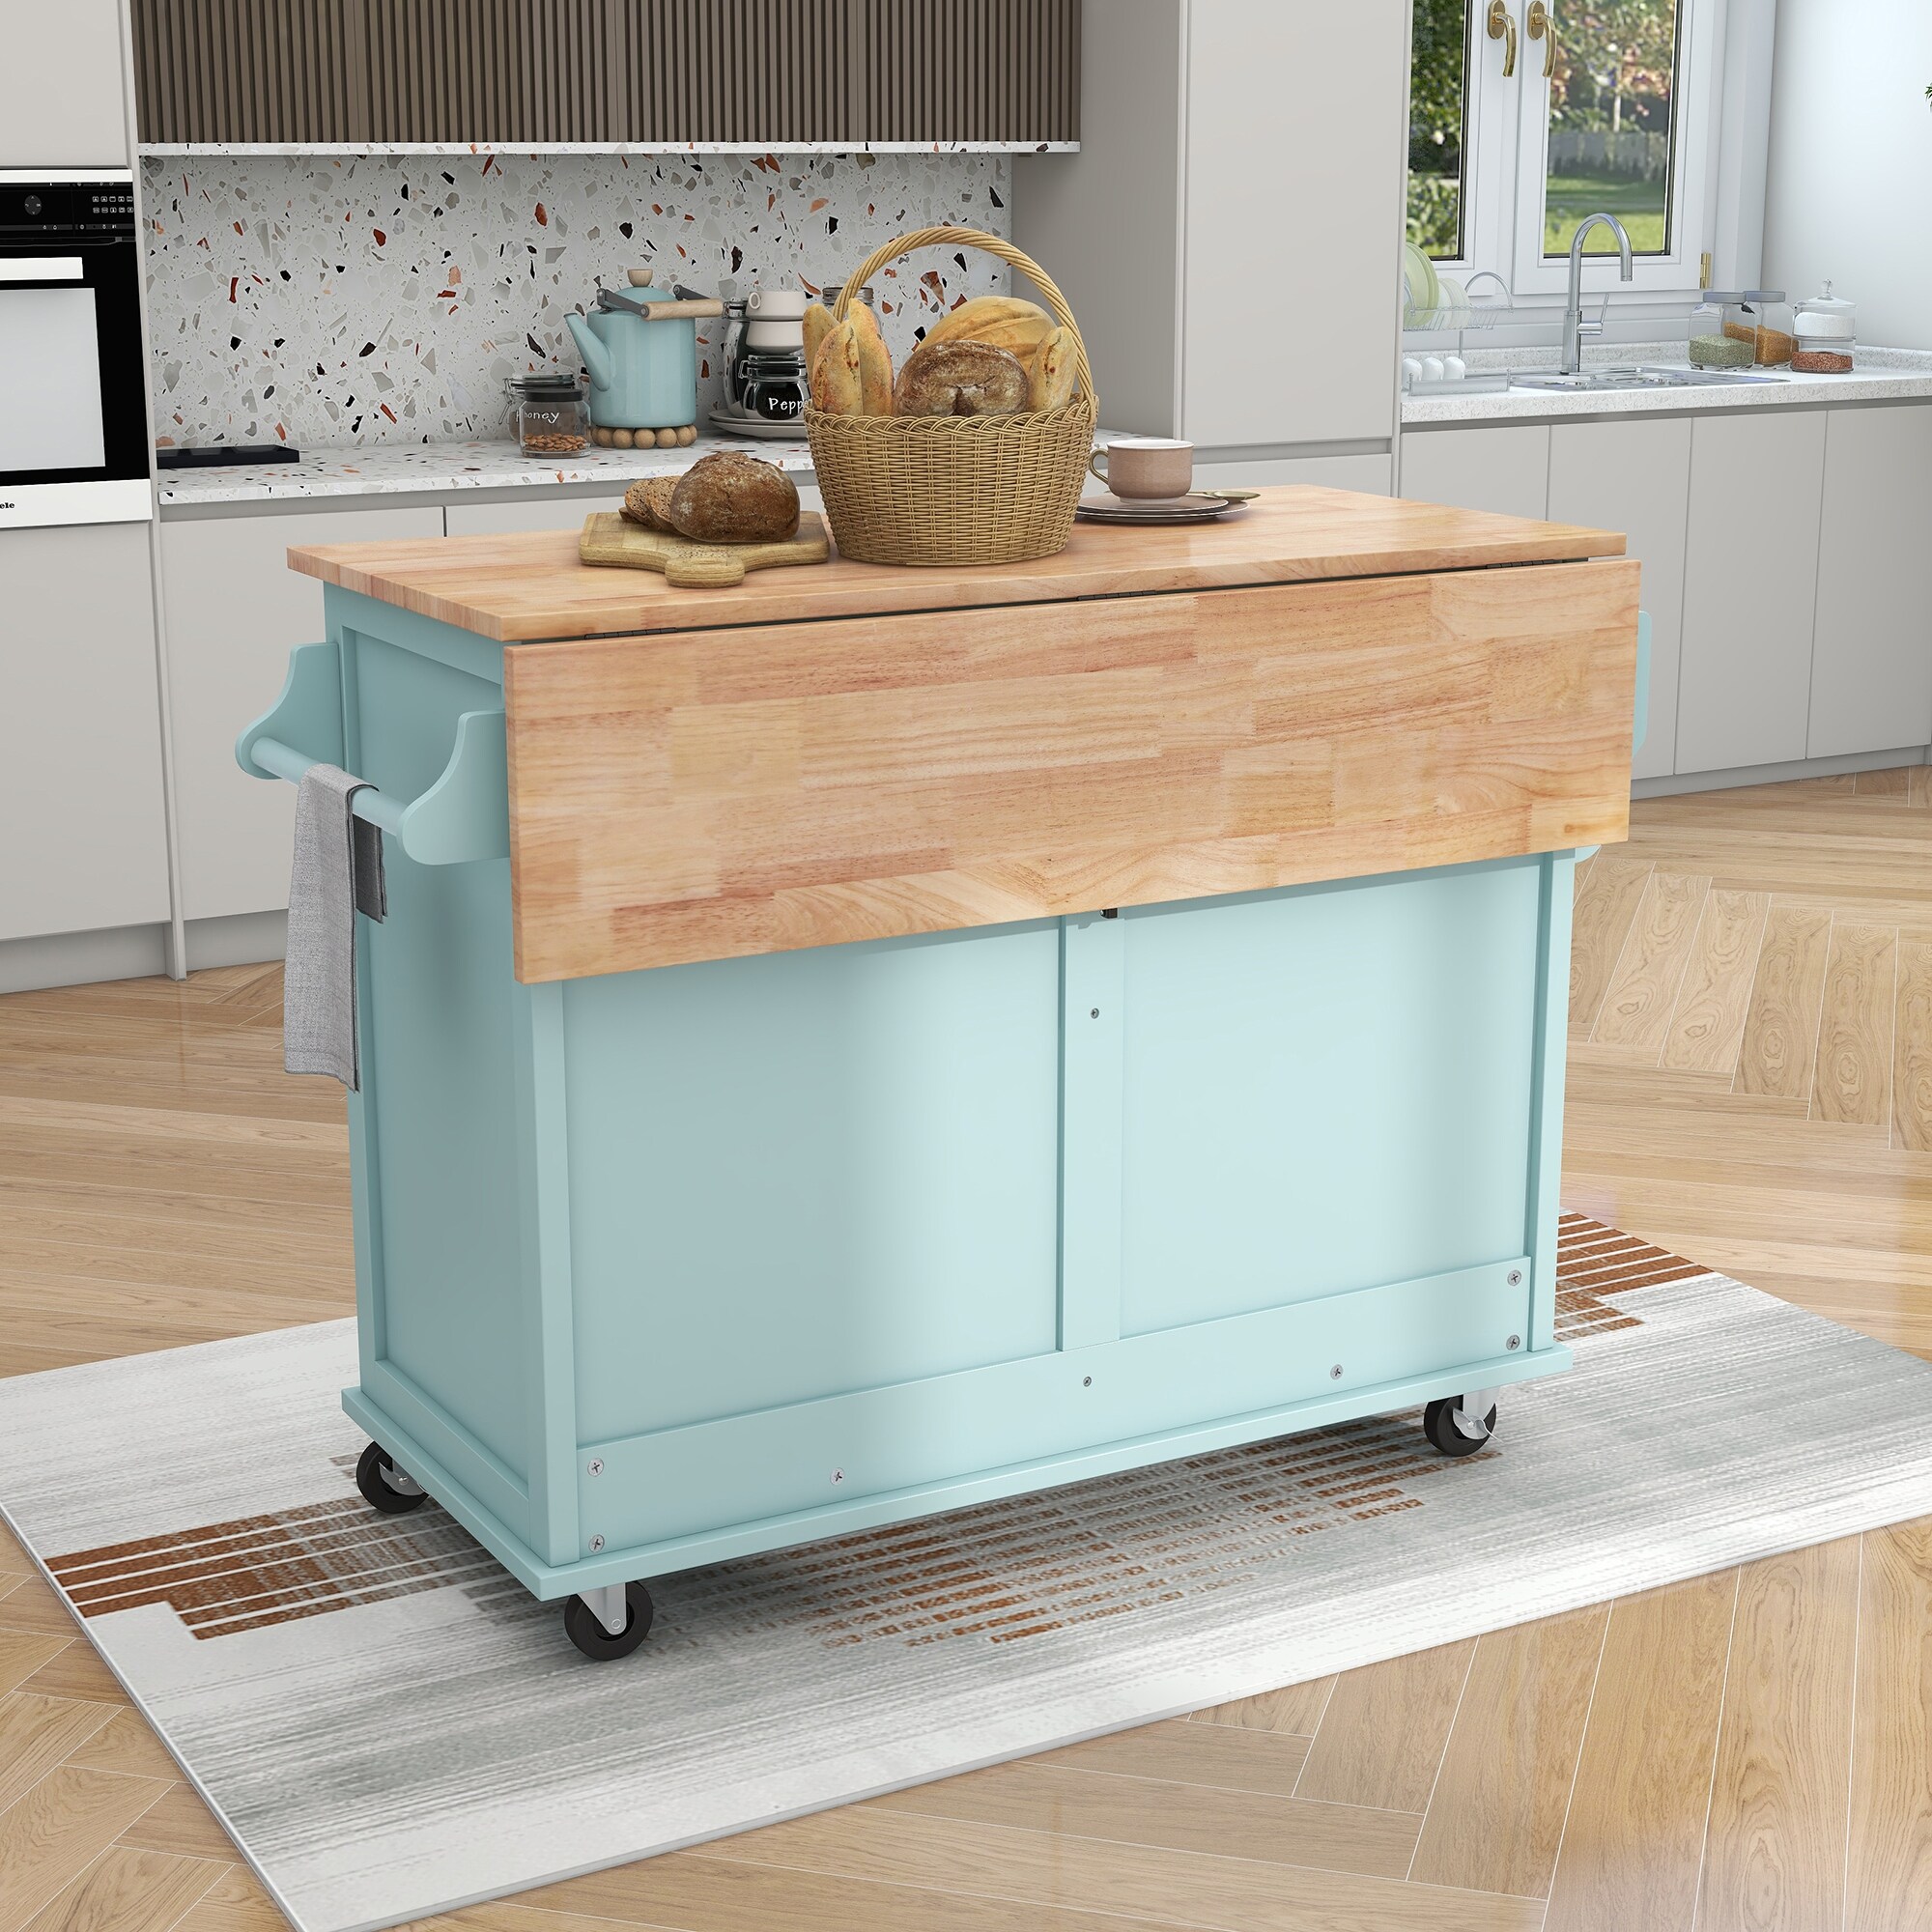 https://ak1.ostkcdn.com/images/products/is/images/direct/5623ddf9da8997c02f15ec932b88c99082be6122/Kitchen-Island-Cart-with-Solid-Wood-Top-and-Locking-Wheels.jpg